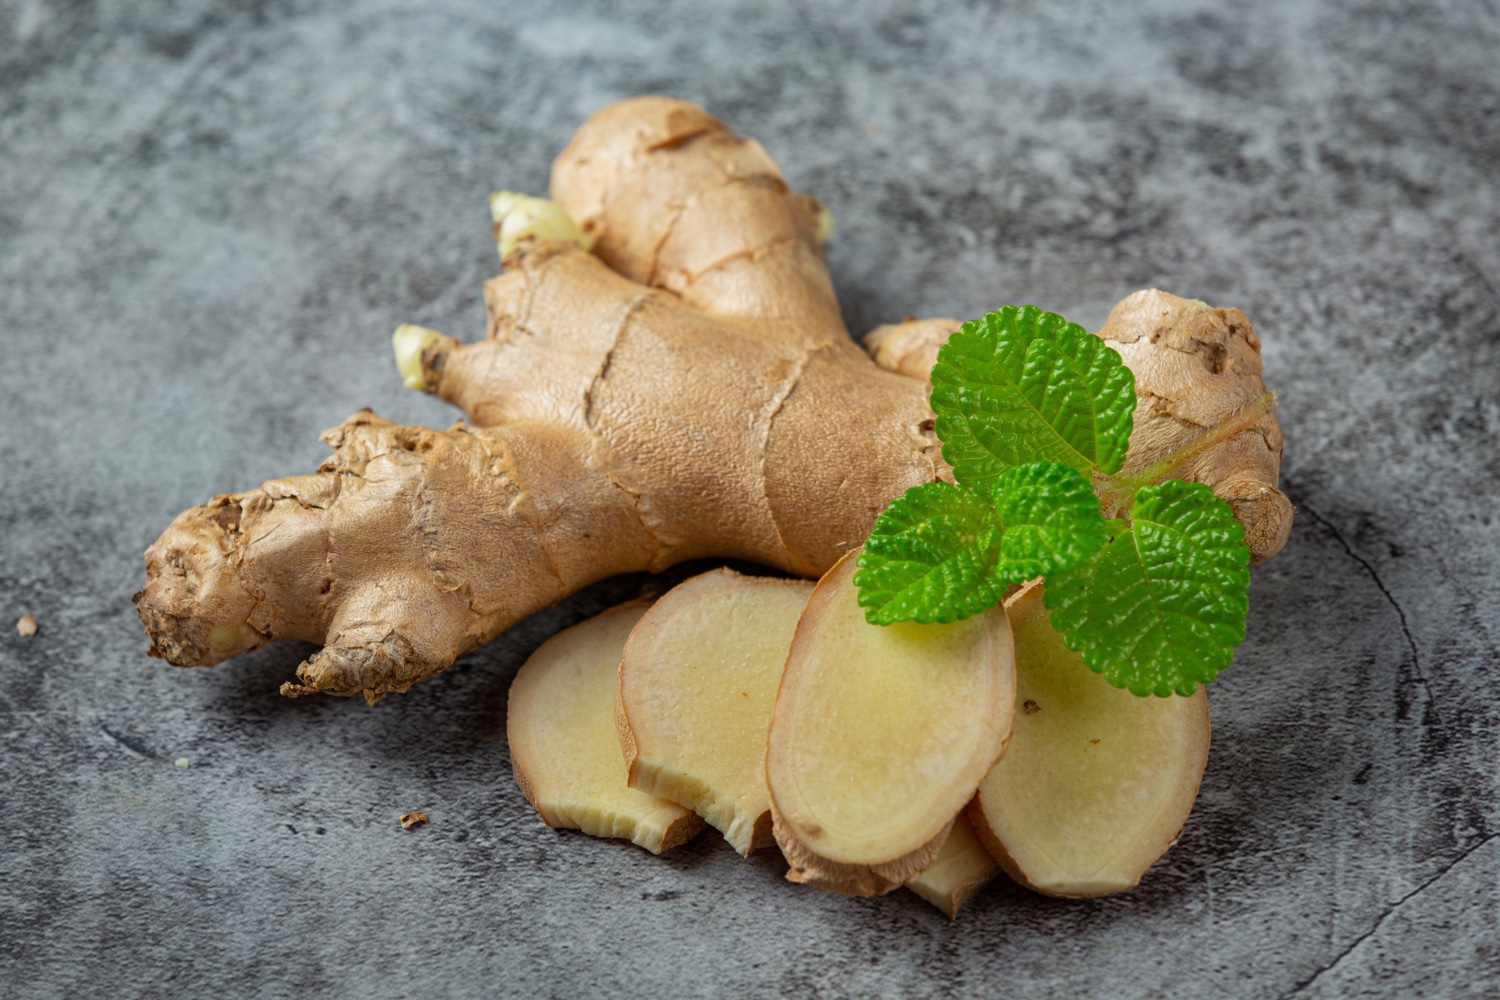 Kencur ginger possesses anti-cancer effects; study thumbnail